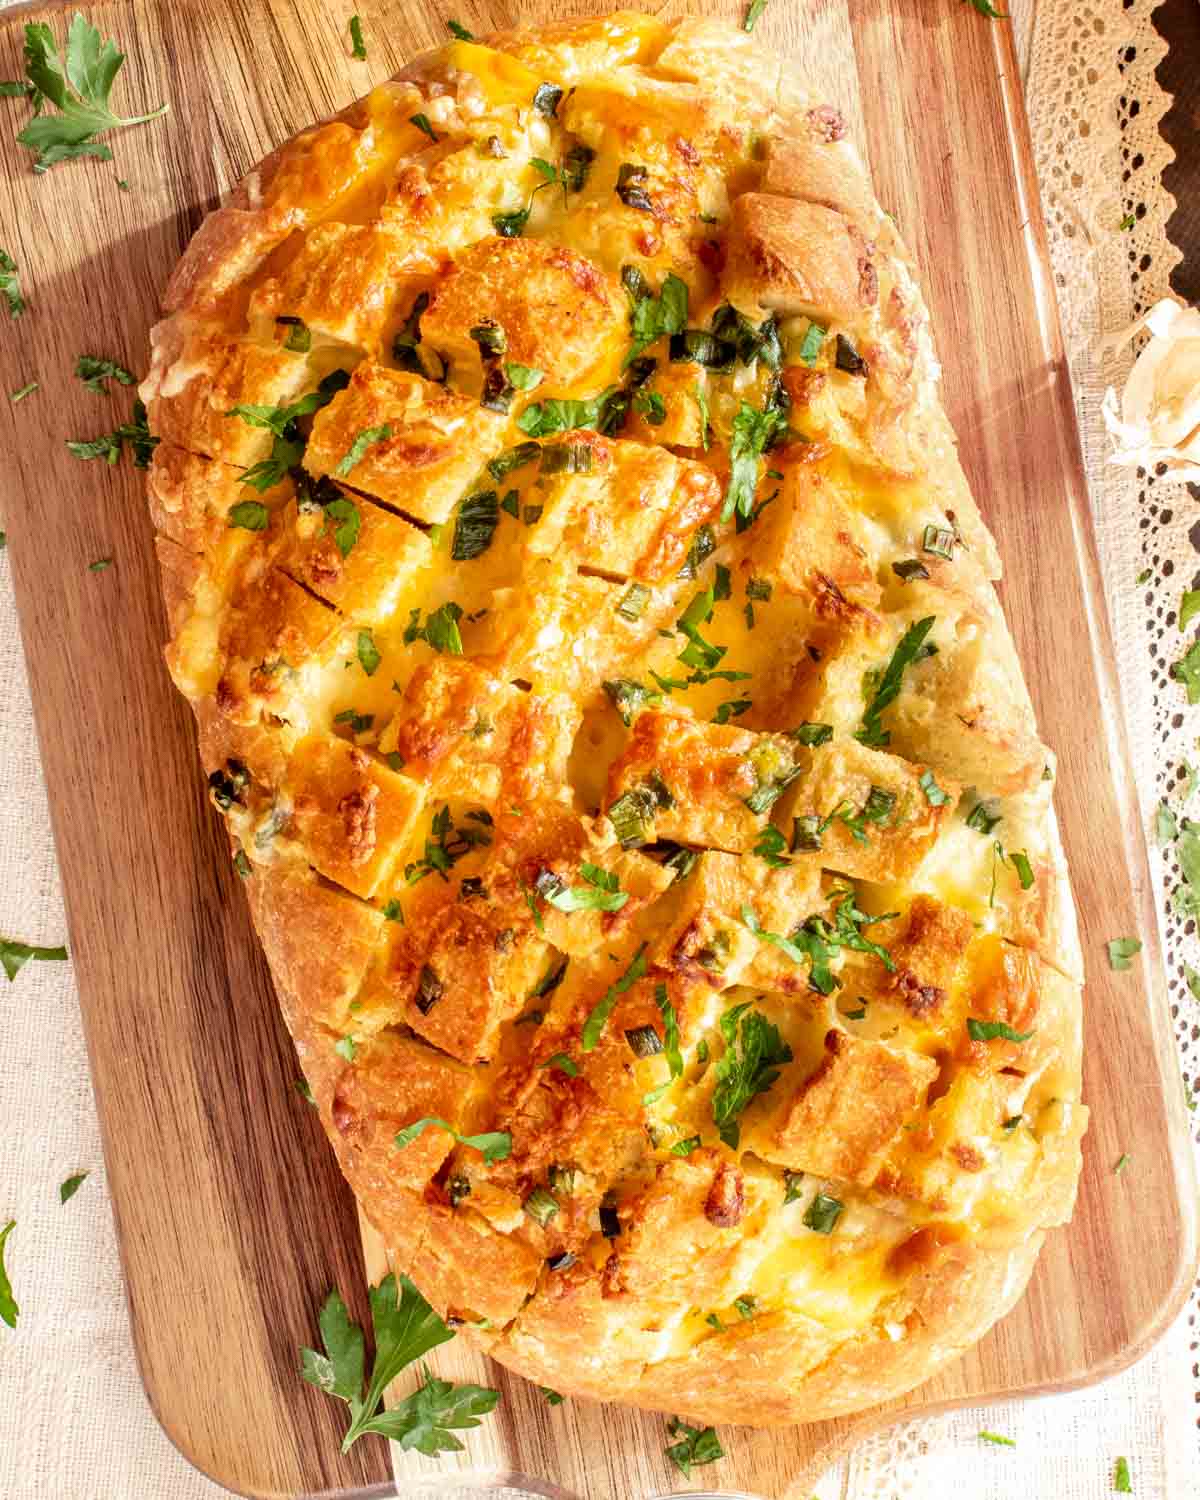 cheese pull apart bread that was made in an air fryer on a cutting board.